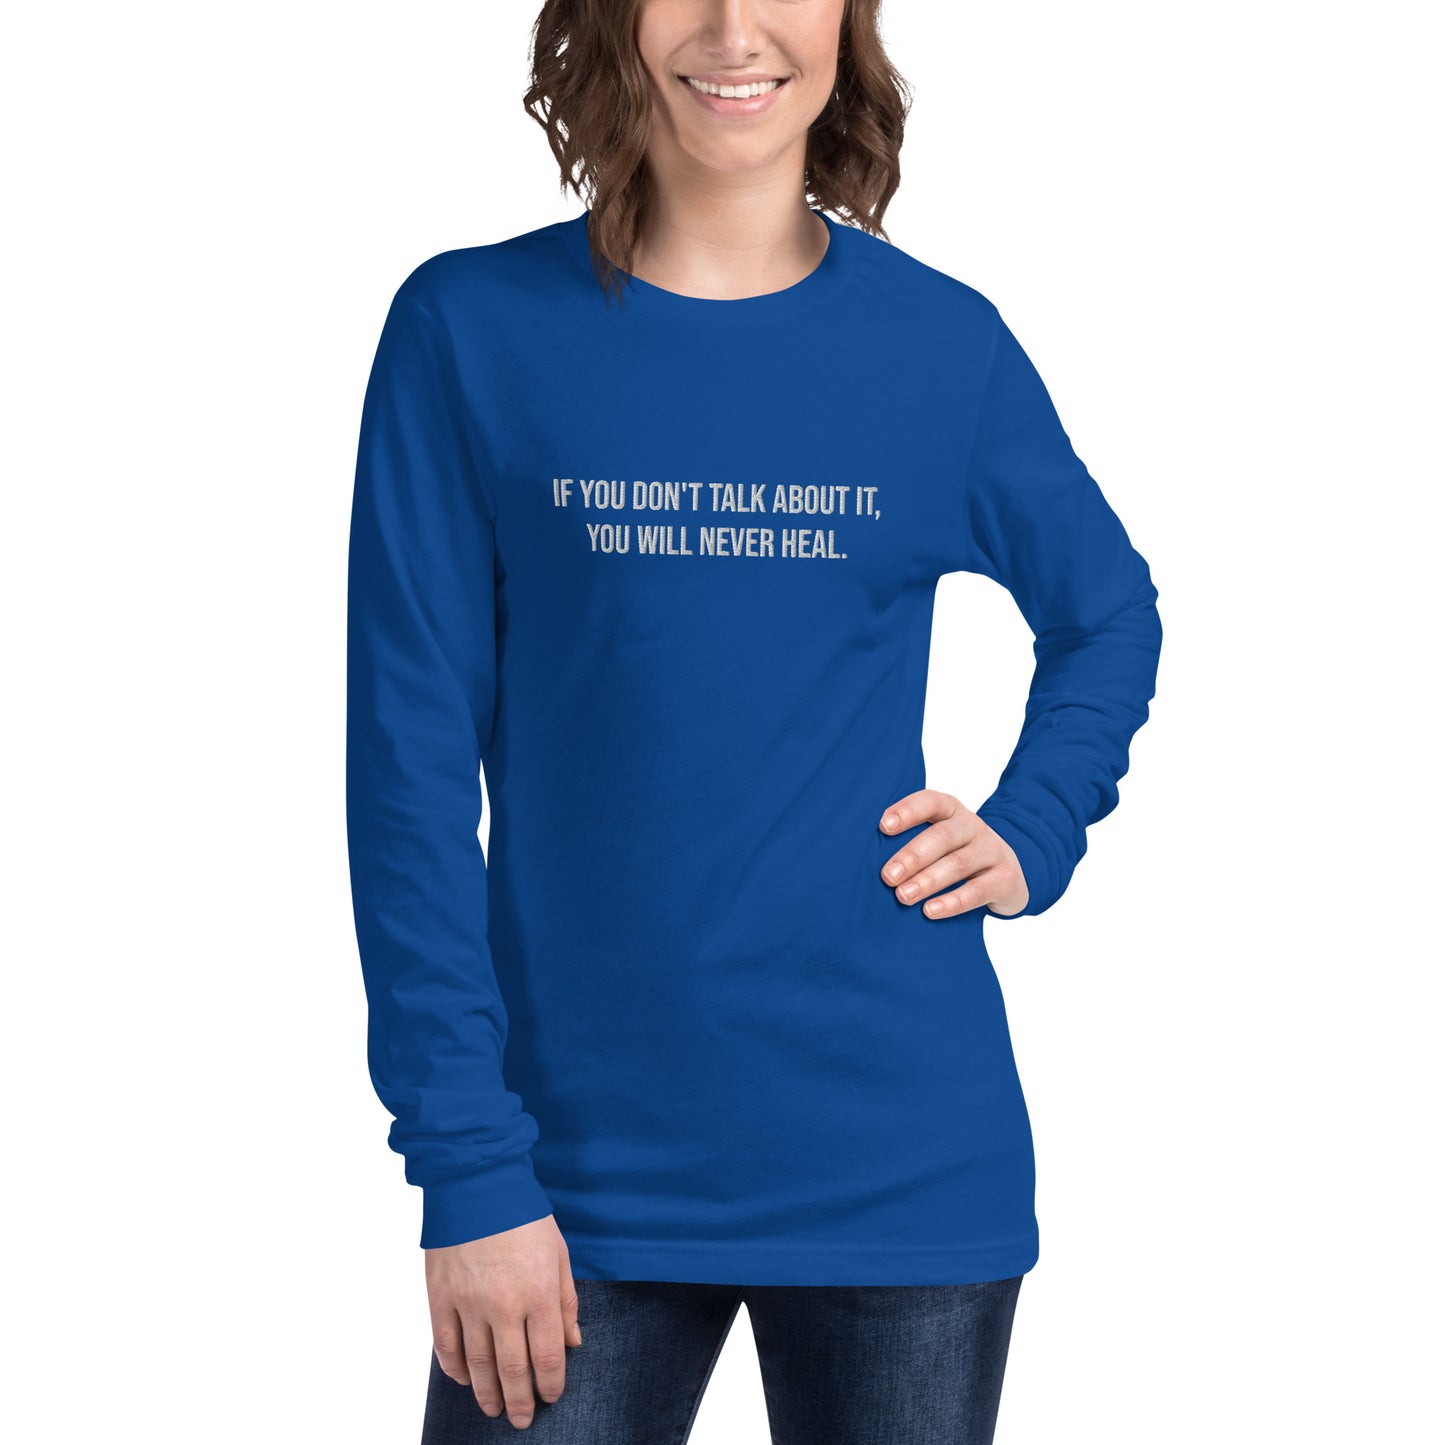 If You Don't Talk About It, You Will Never Heal Embroidered Unisex T-Shirt